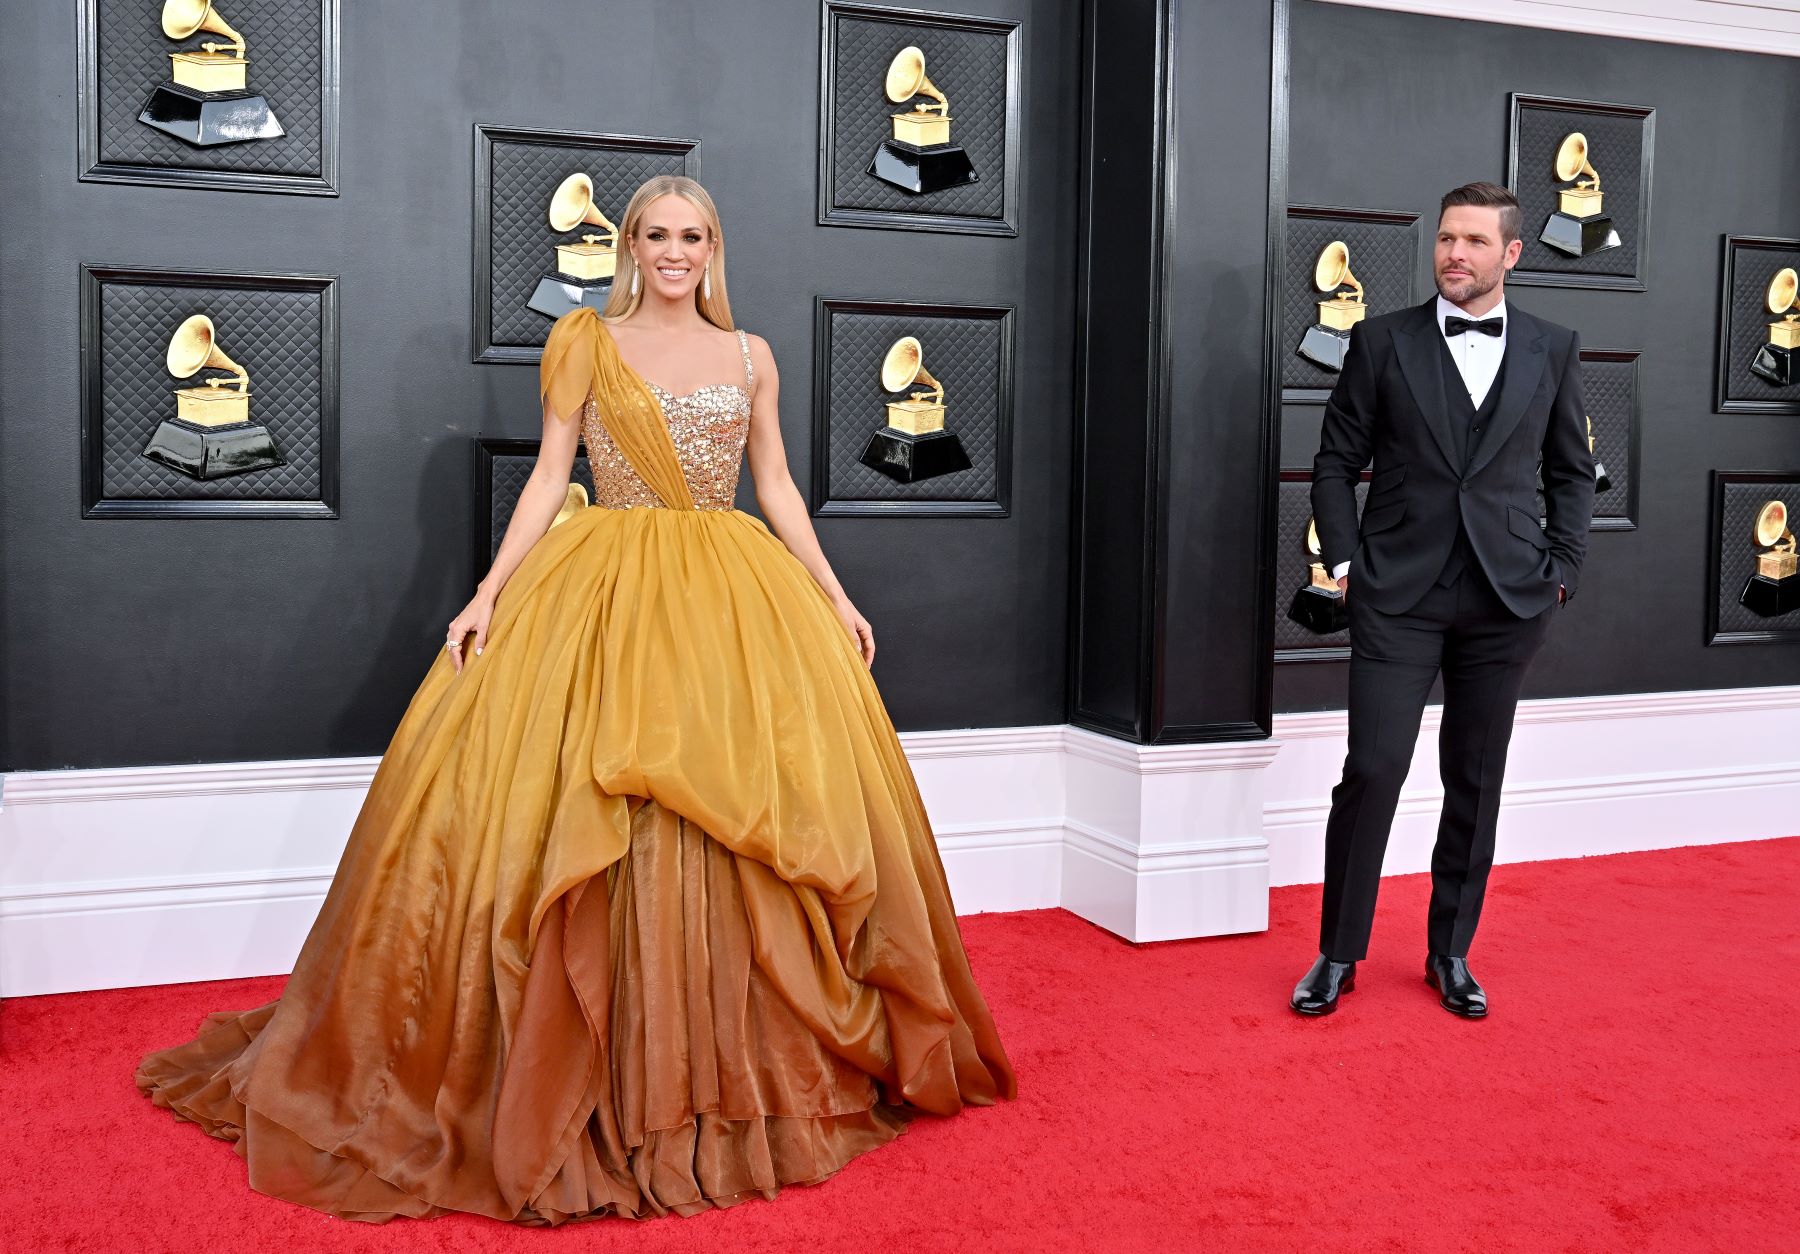 Carrie Underwood Nearly Passed on Her 'Massive' Ballgown for the